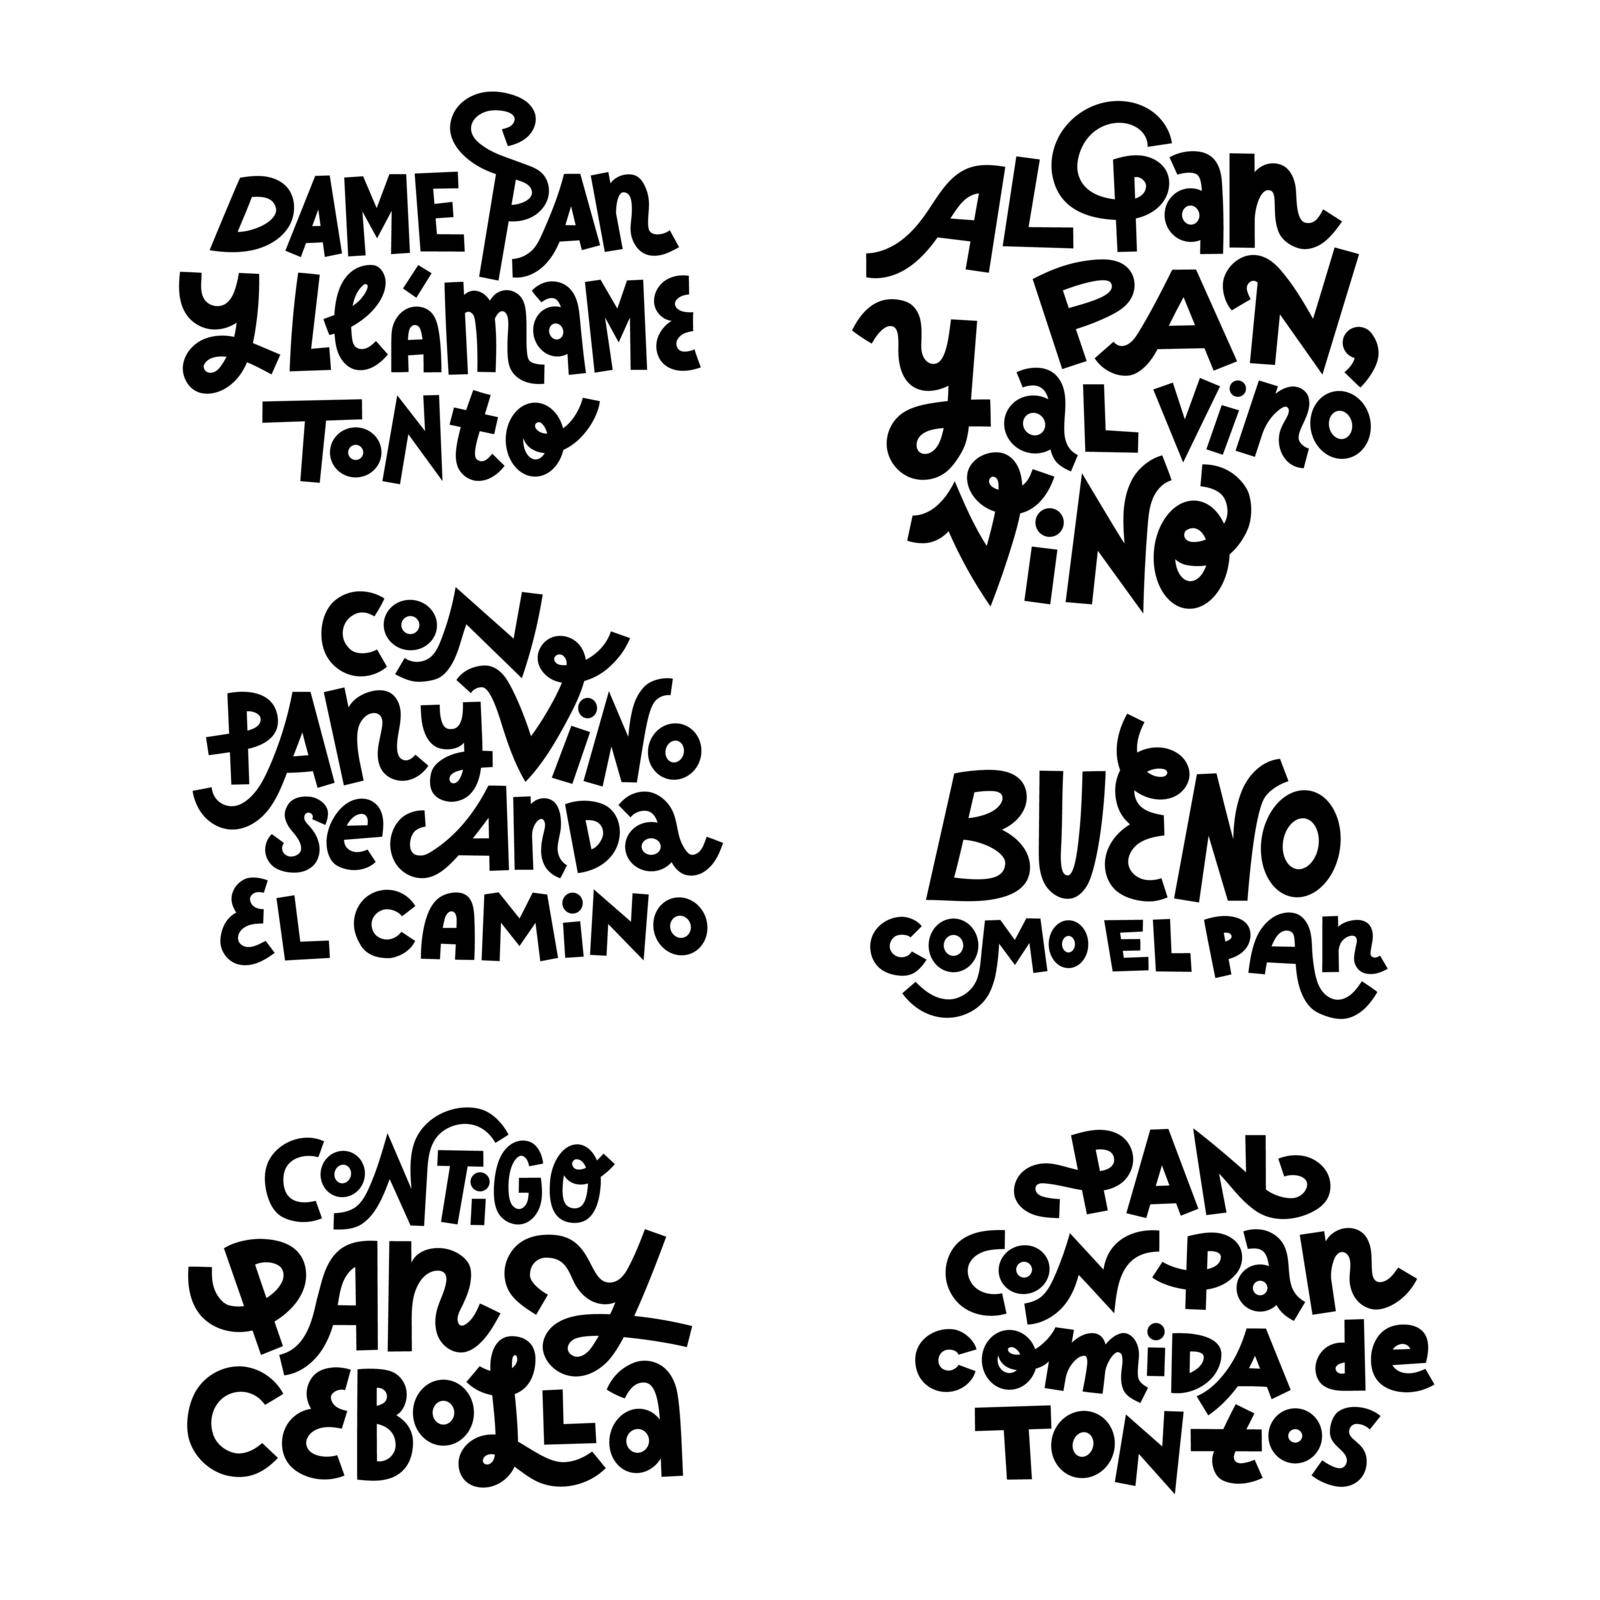 Set of spanish sayings about bread. Hand drawn lettering print for T-shirts, tote bags, mugs etc. Black and white vector quotes for cutting.